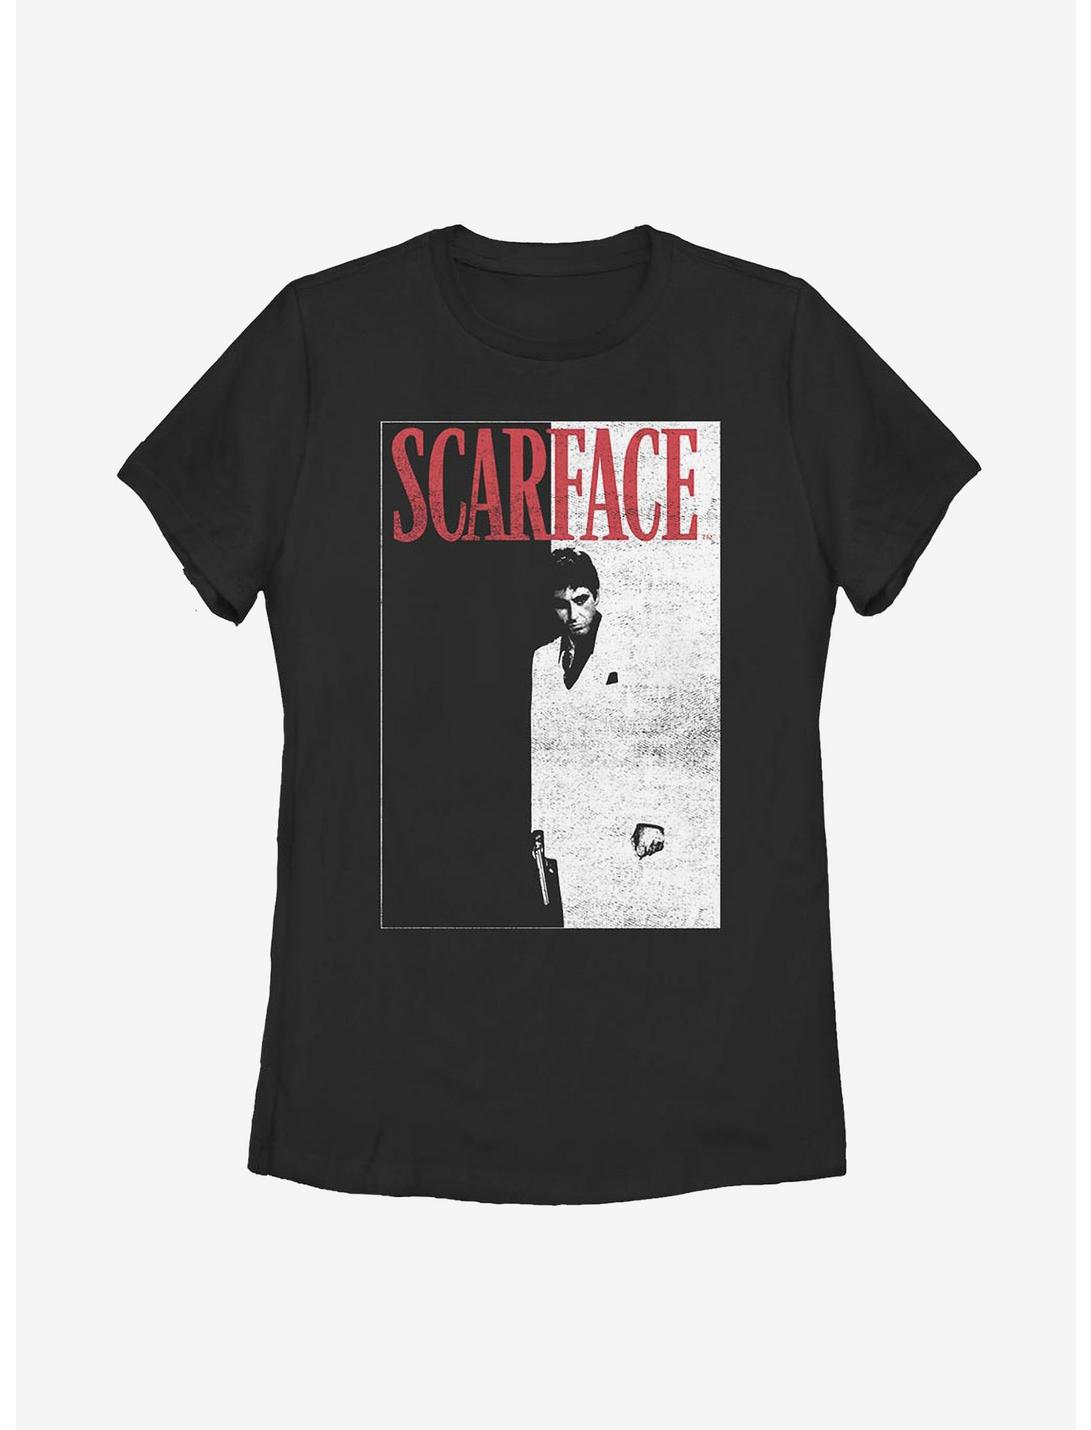 Scarface Classic Poster Womens T-Shirt, BLACK, hi-res